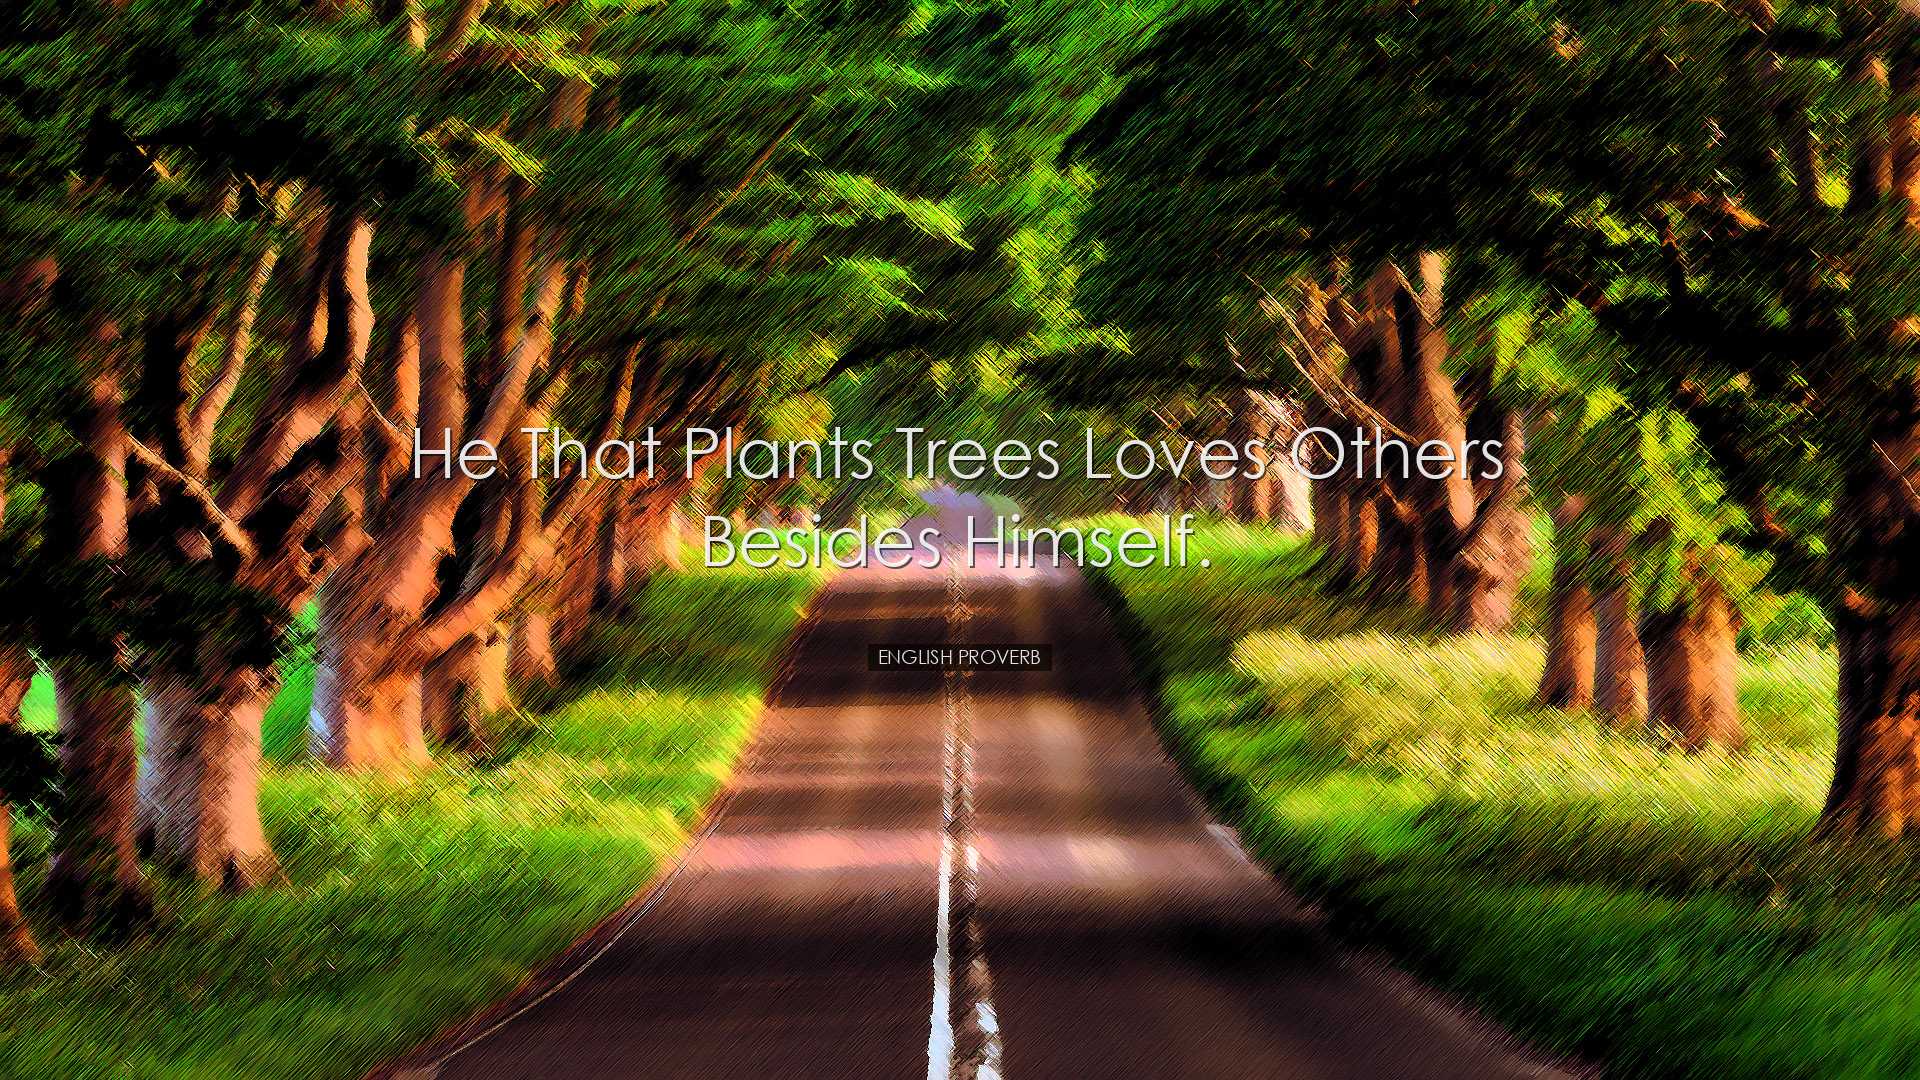 He that plants trees loves others besides himself. - English Prove